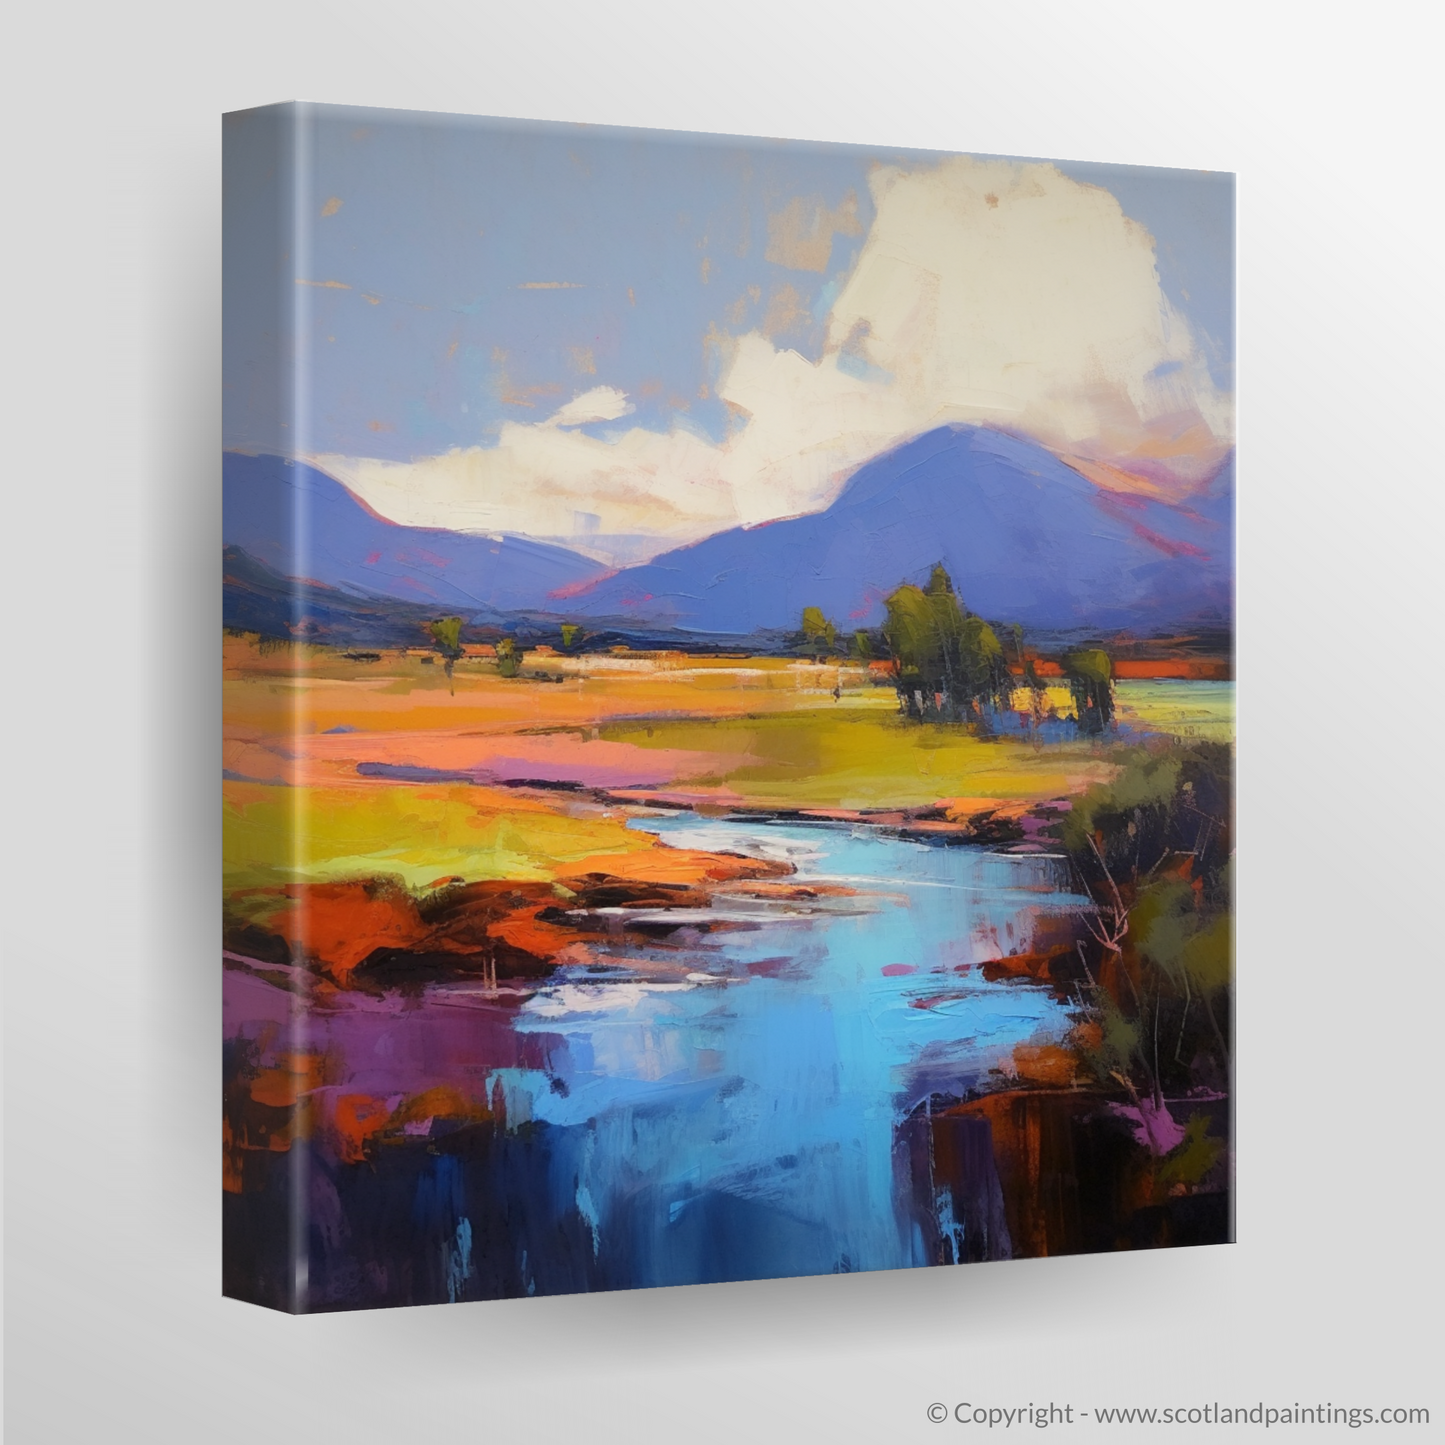 Summer's Embrace: An Expressionist Journey Along the River Spean